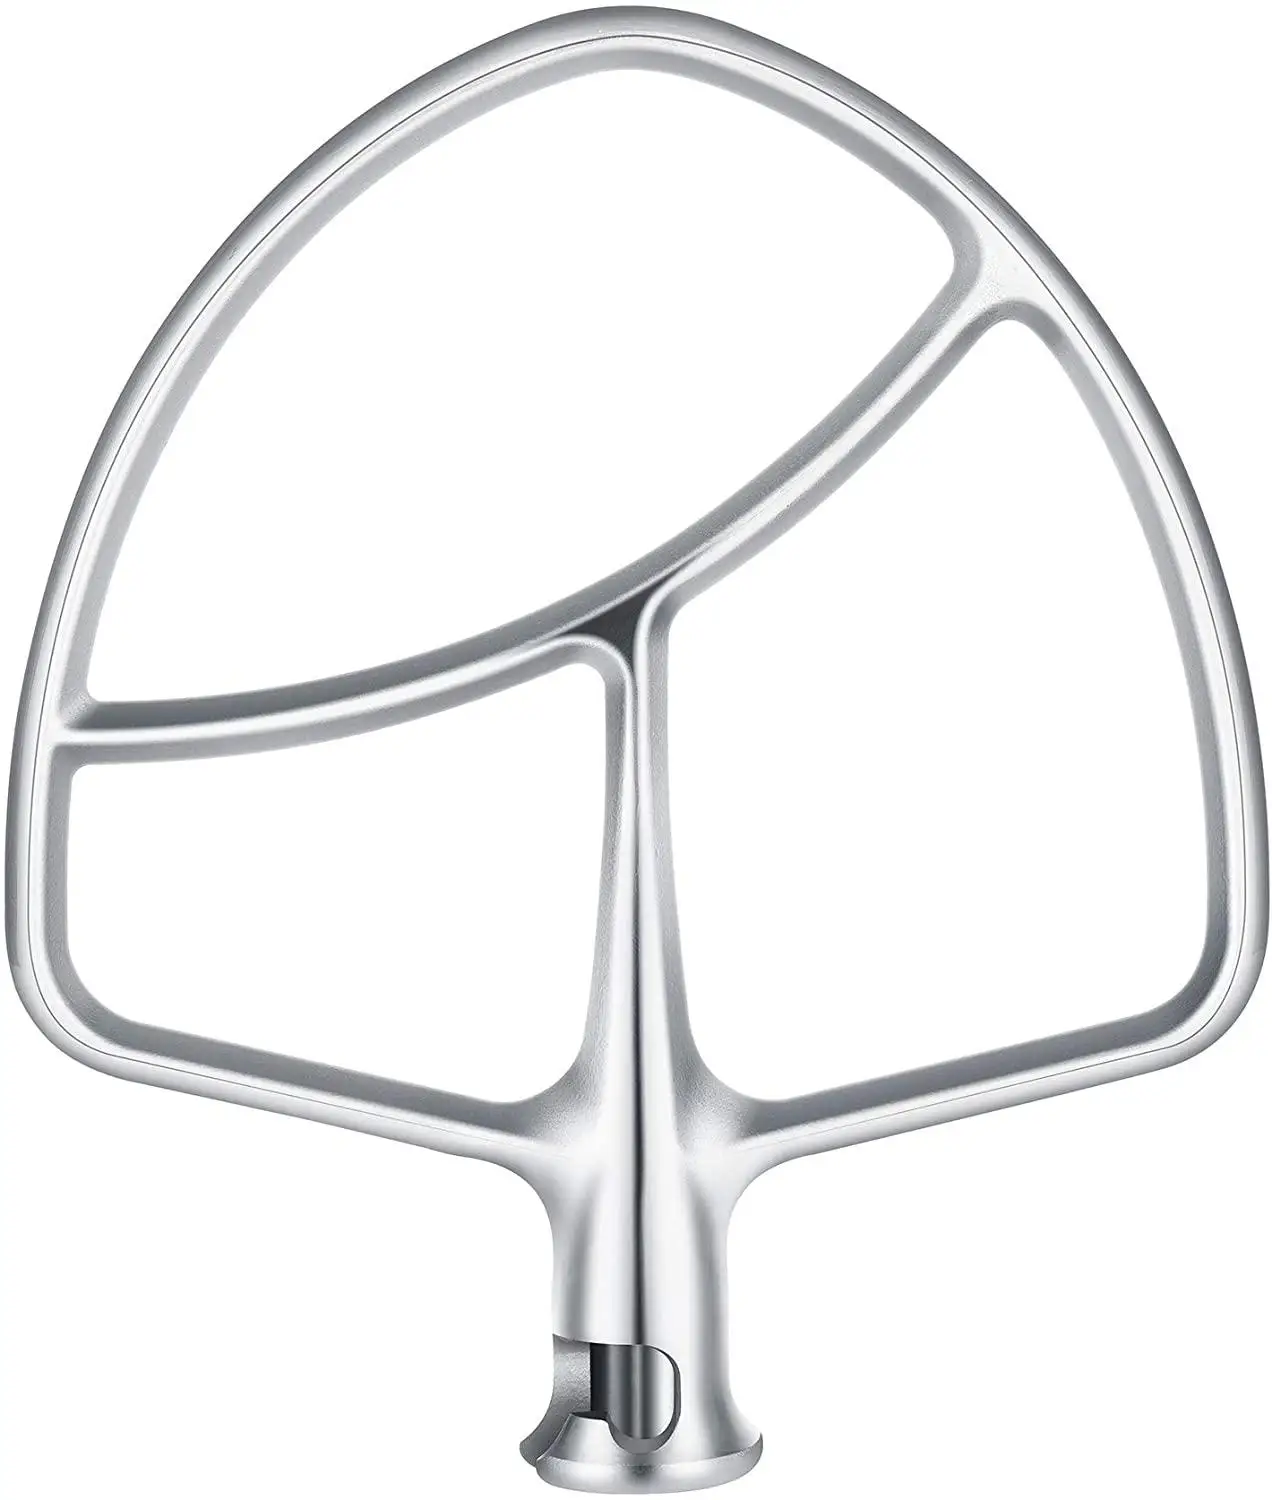 Stainless Steel Flat Beater for KitchenAid 6quart Bowl-Lift Stand